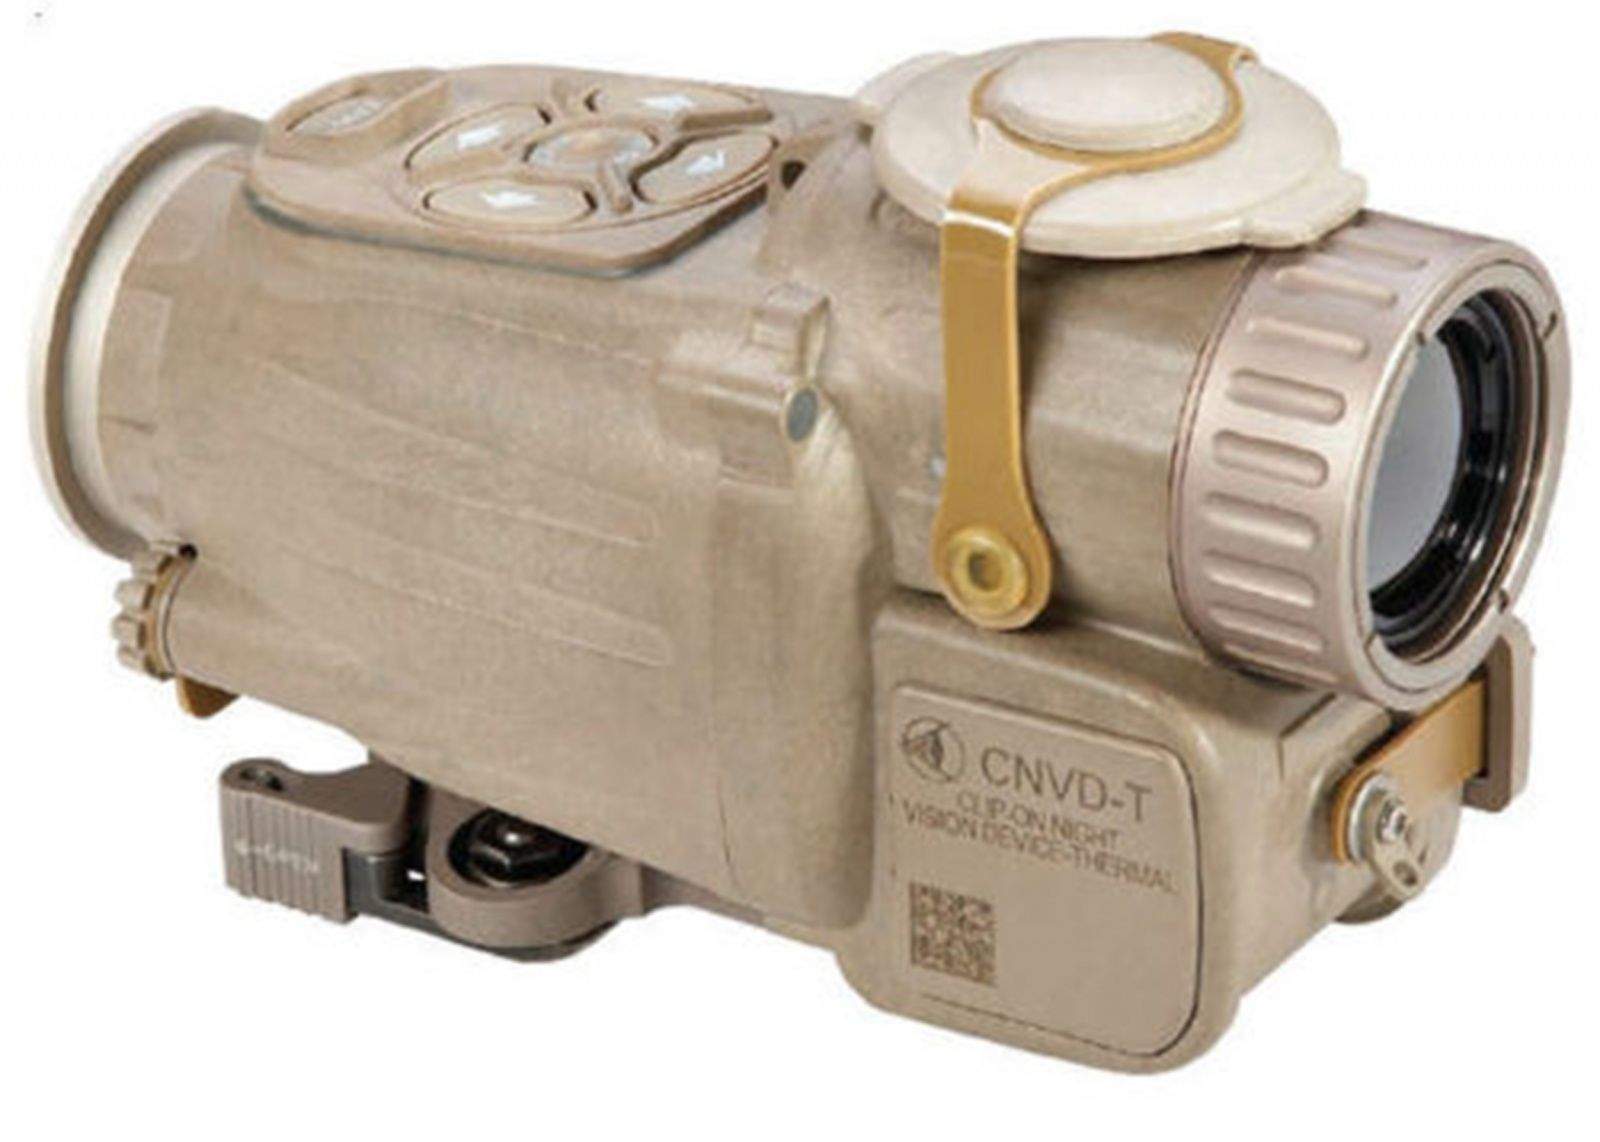 This night vision device, missing from a $750 million military program, can be yours on eBay for just over $16,000. Photo: eBay